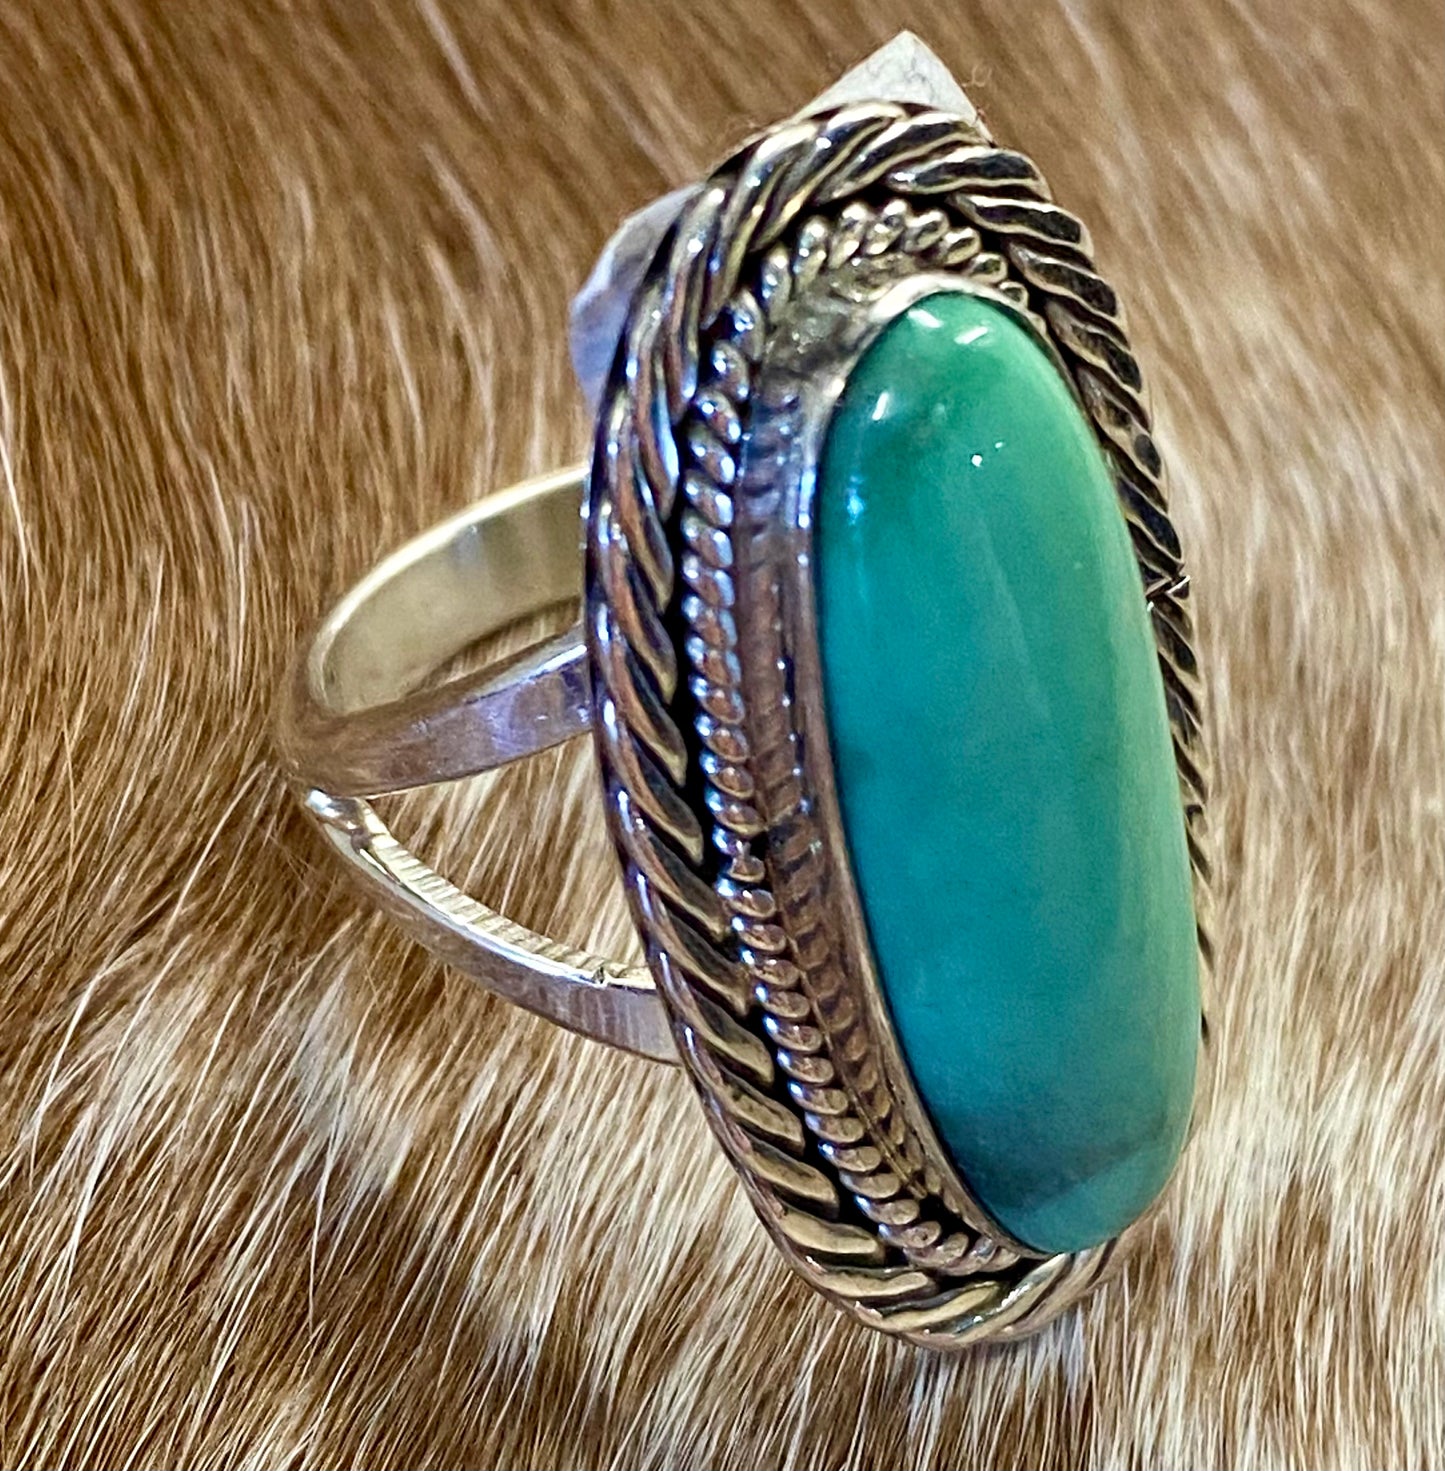 Beautiful simple and elegant Native made sterling silver single stone turquoise ring. Stamped .925 and signed "R.B." inside of a bear icon for Running Bear Shop. The perfect everyday turquoise ring!   Size: 1.25” inches length x .5” inch width   Ring Size: 7  Signed: YES "R.B."   Hallmark/Artist: Running Bear Shop   Stone: Turquoise 